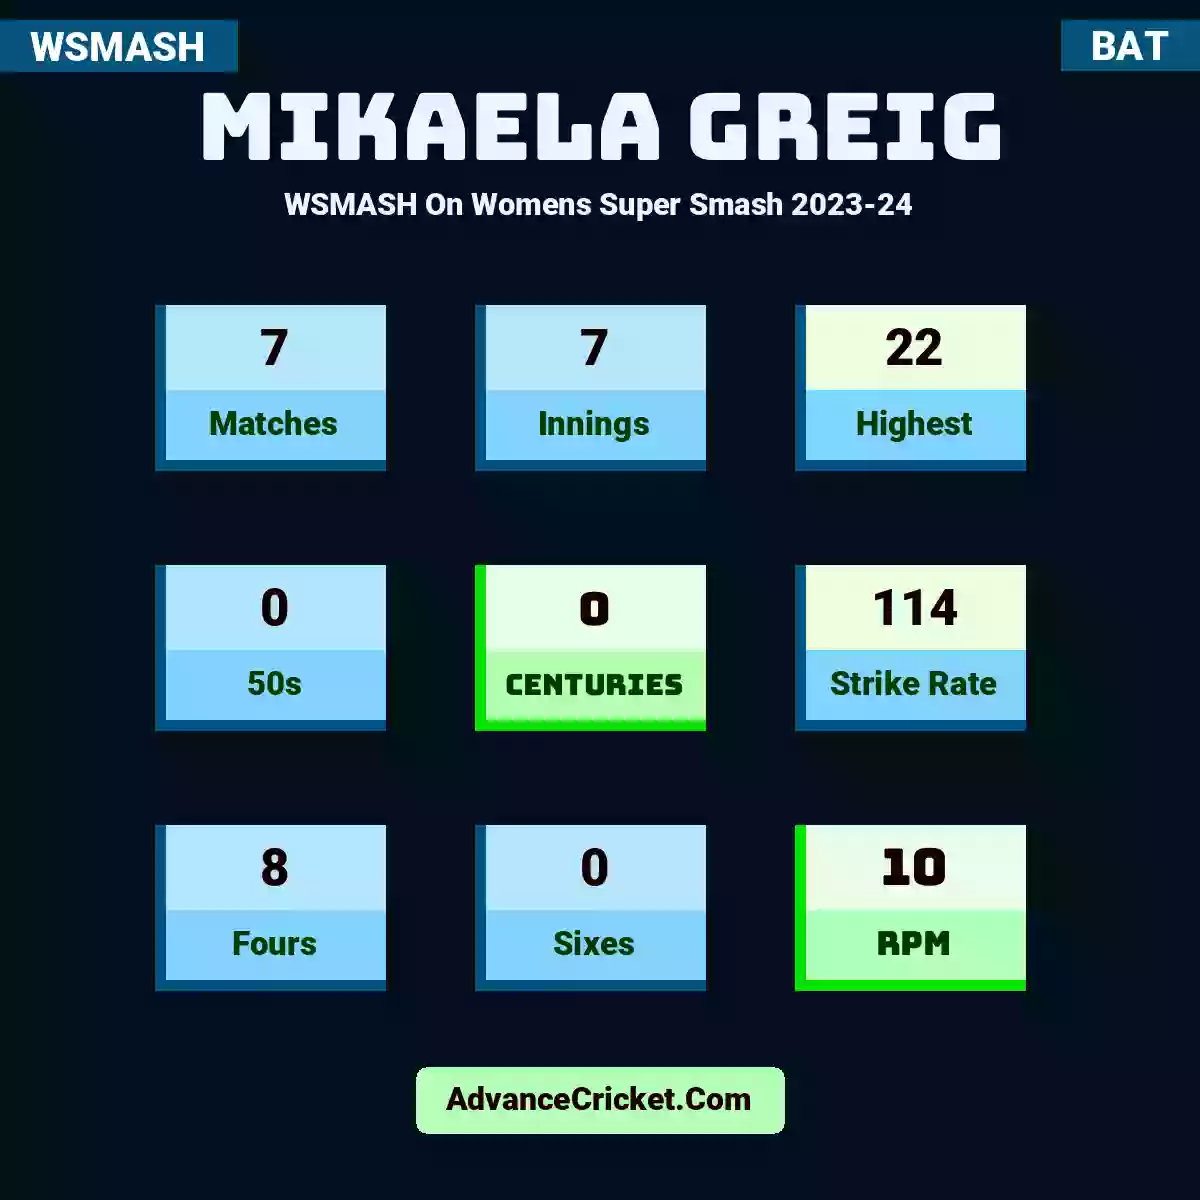 Mikaela Greig WSMASH  On Womens Super Smash 2023-24, Mikaela Greig played 7 matches, scored 22 runs as highest, 0 half-centuries, and 0 centuries, with a strike rate of 114. M.Greig hit 8 fours and 0 sixes, with an RPM of 10.